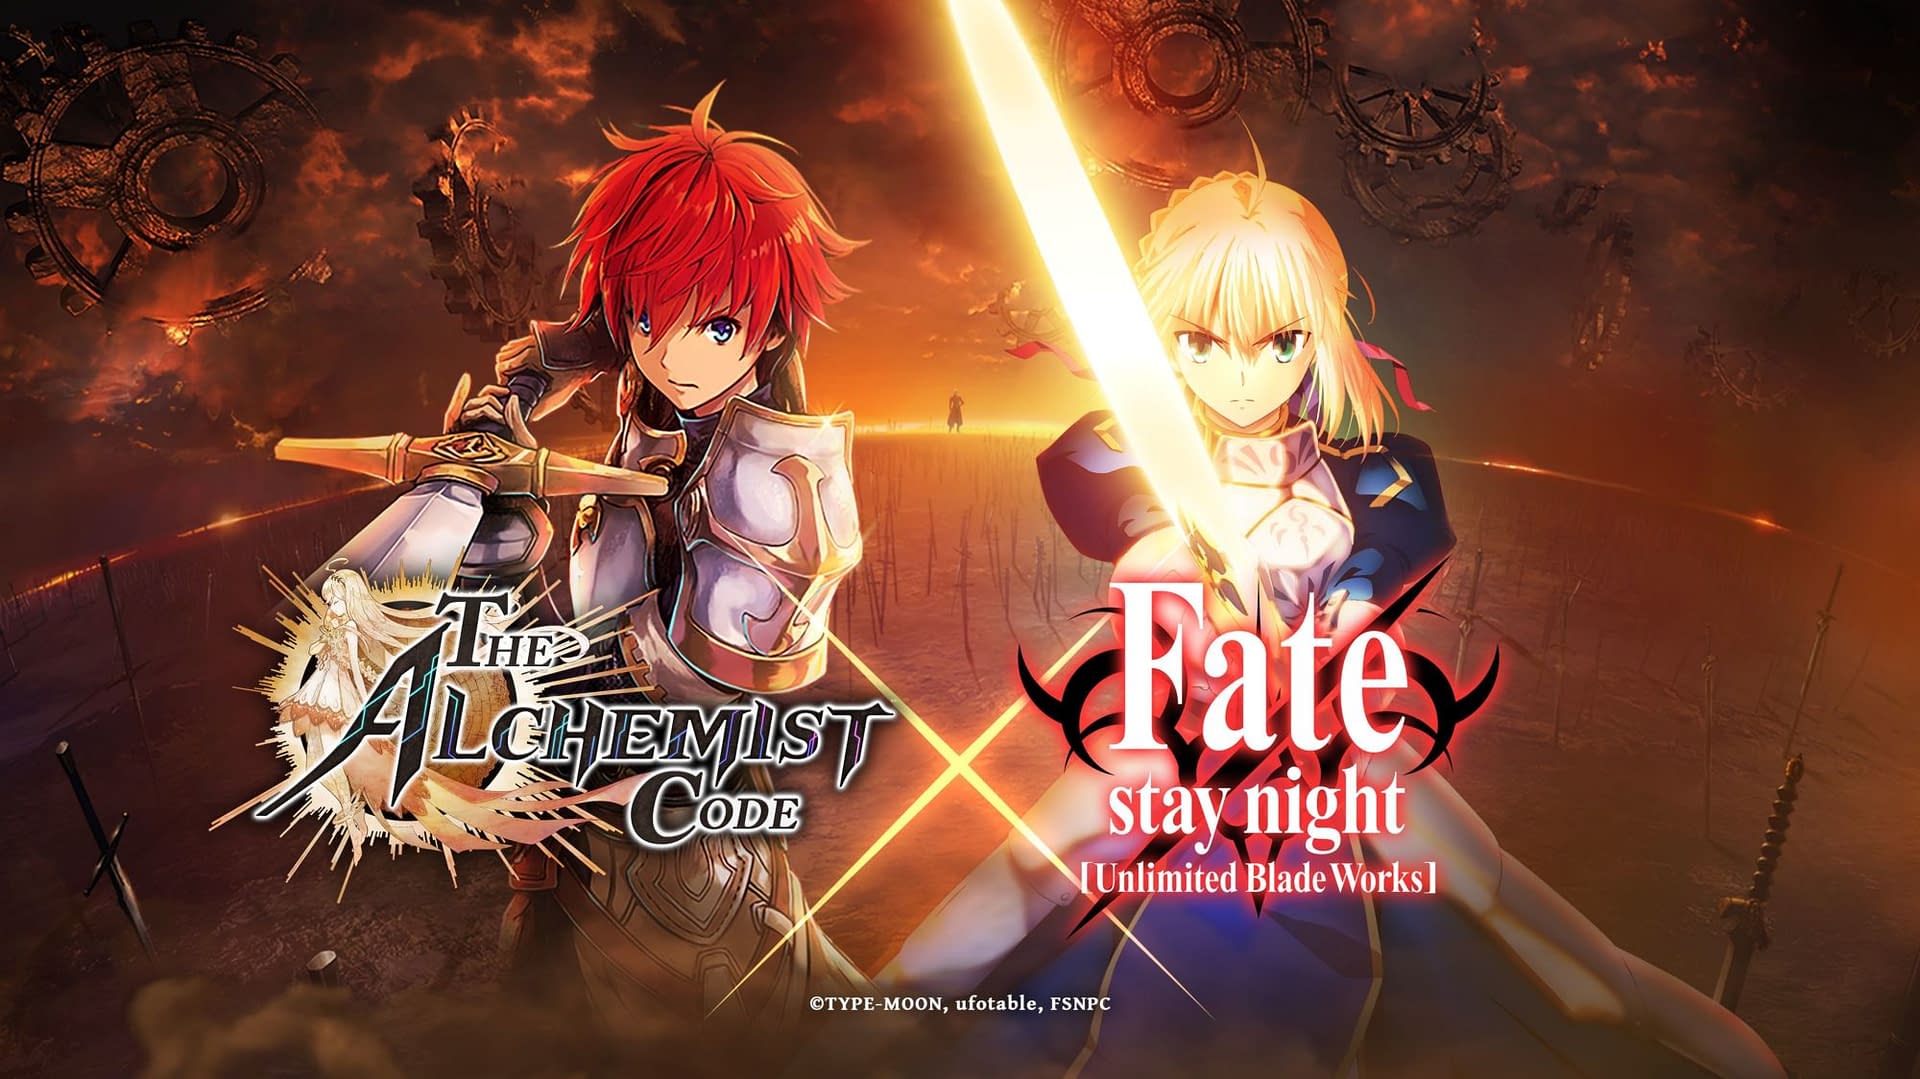 The Alchemist Code Is Getting A Crossover With Fate Stay Night Unlimited Bladeworks